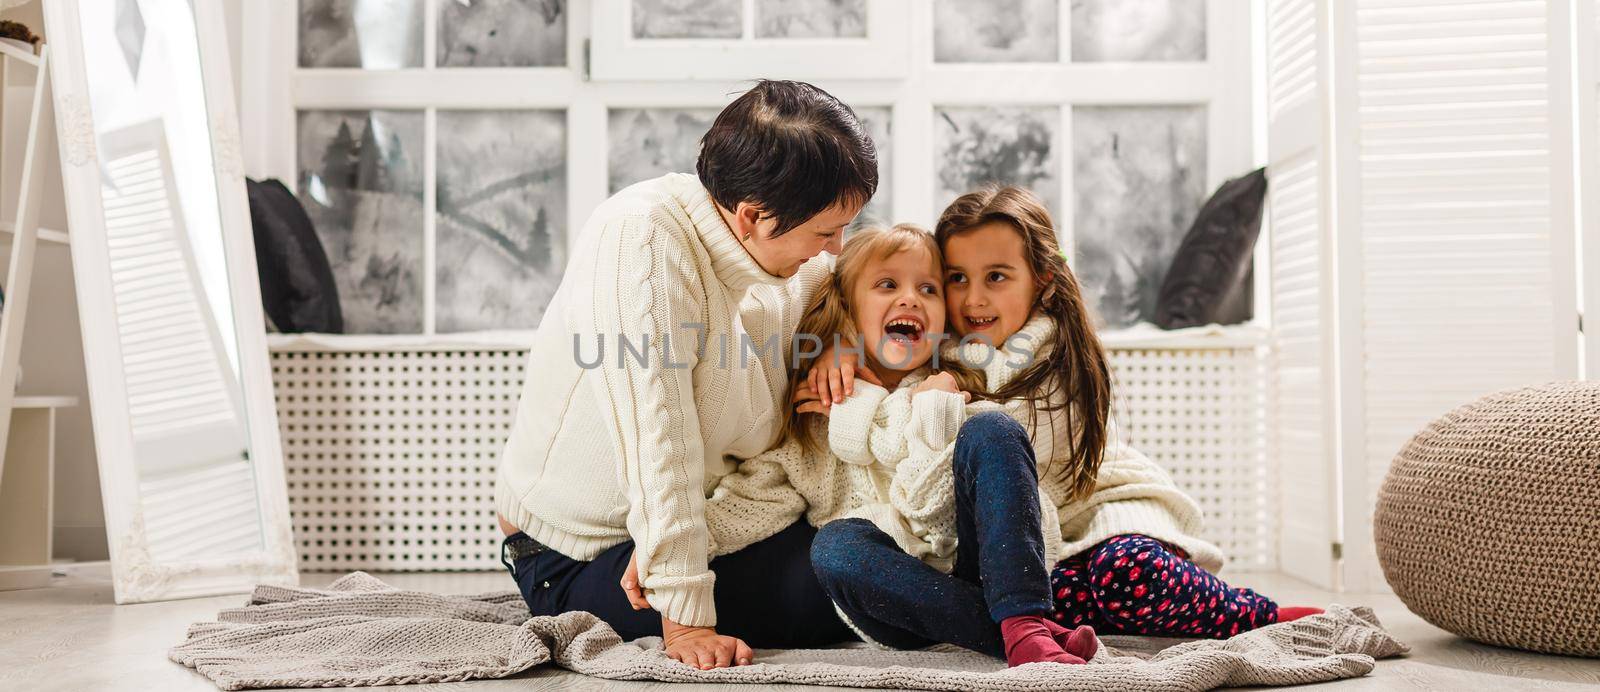 Merry Christmas and Happy Holidays. Cheerful mom and her cute daughters girls exchanging gifts. Parent and two little children having fun and playing together near Christmas tree indoors. by Andelov13